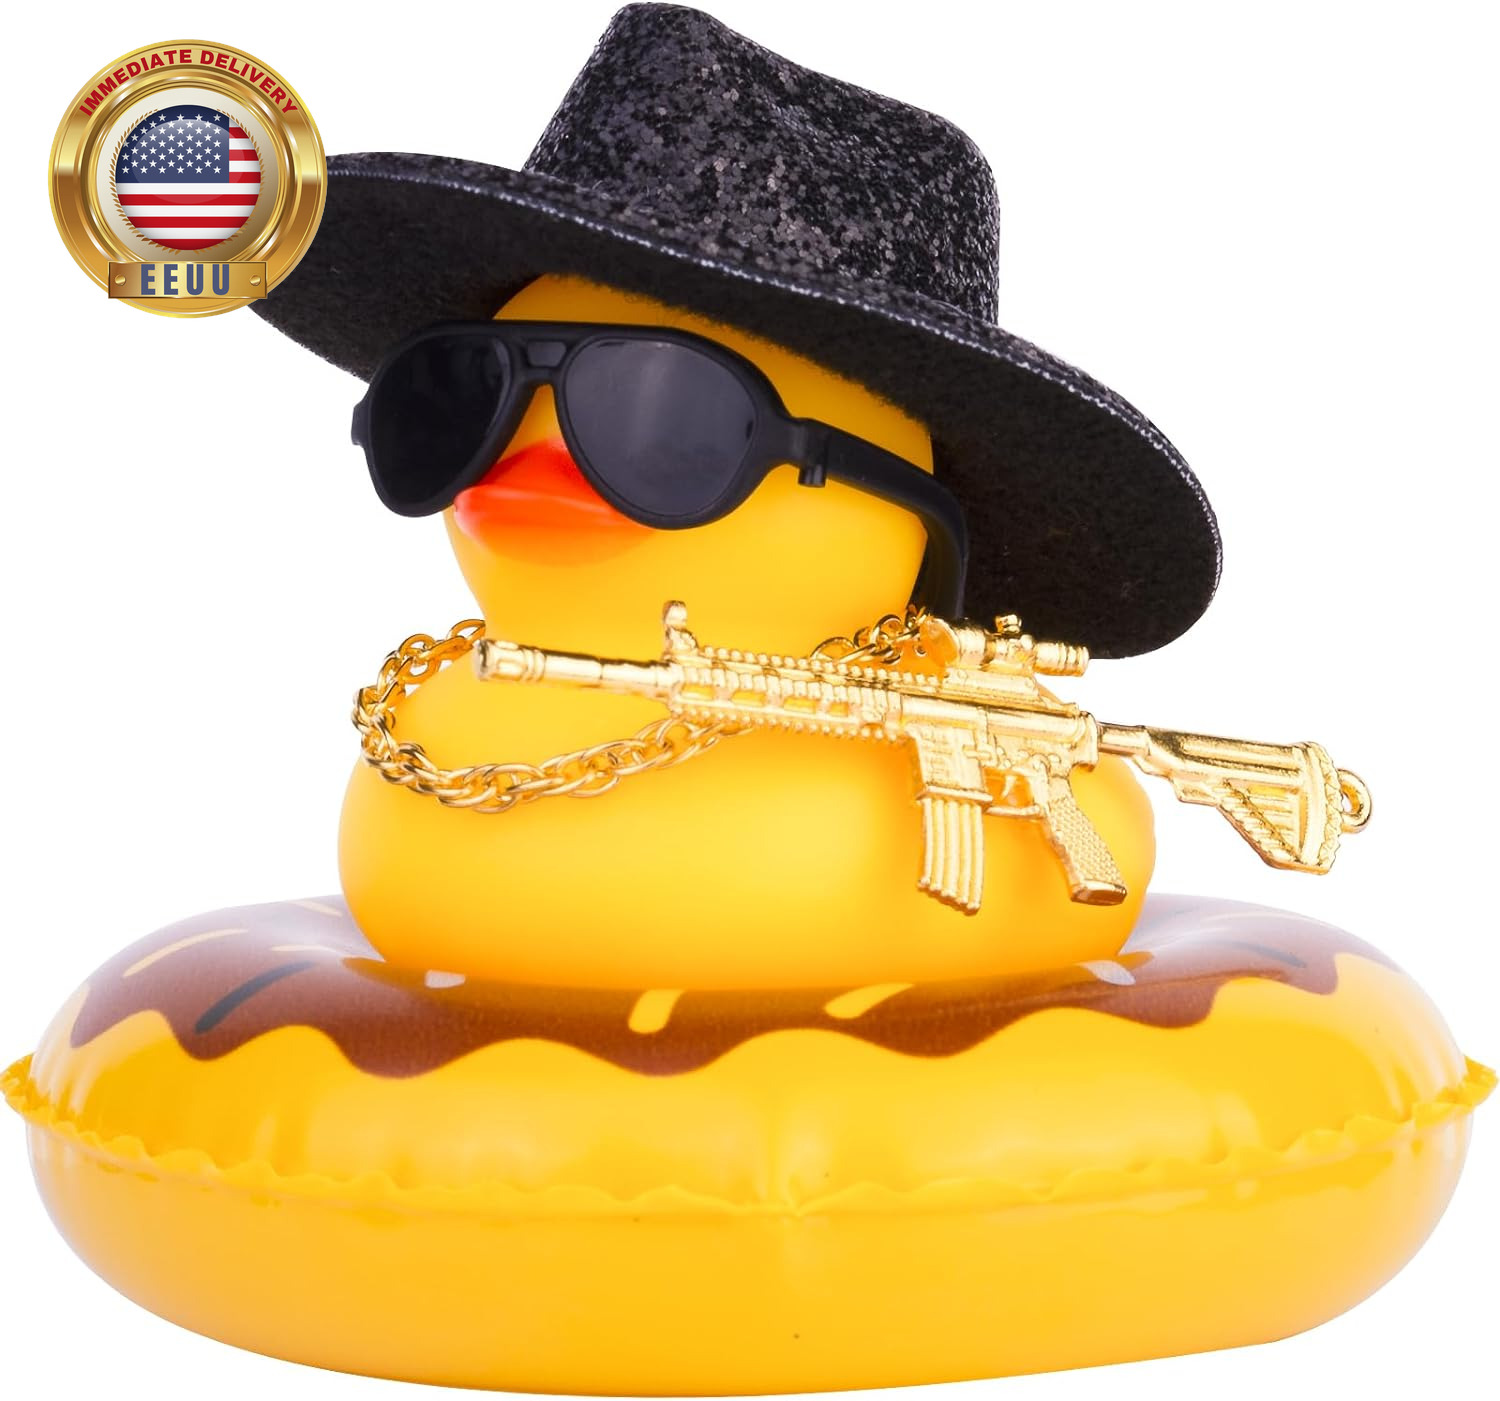 Cowboy Rubber Duck for Car Dashboard, Cool Duck Car Ornaments Accessories with M